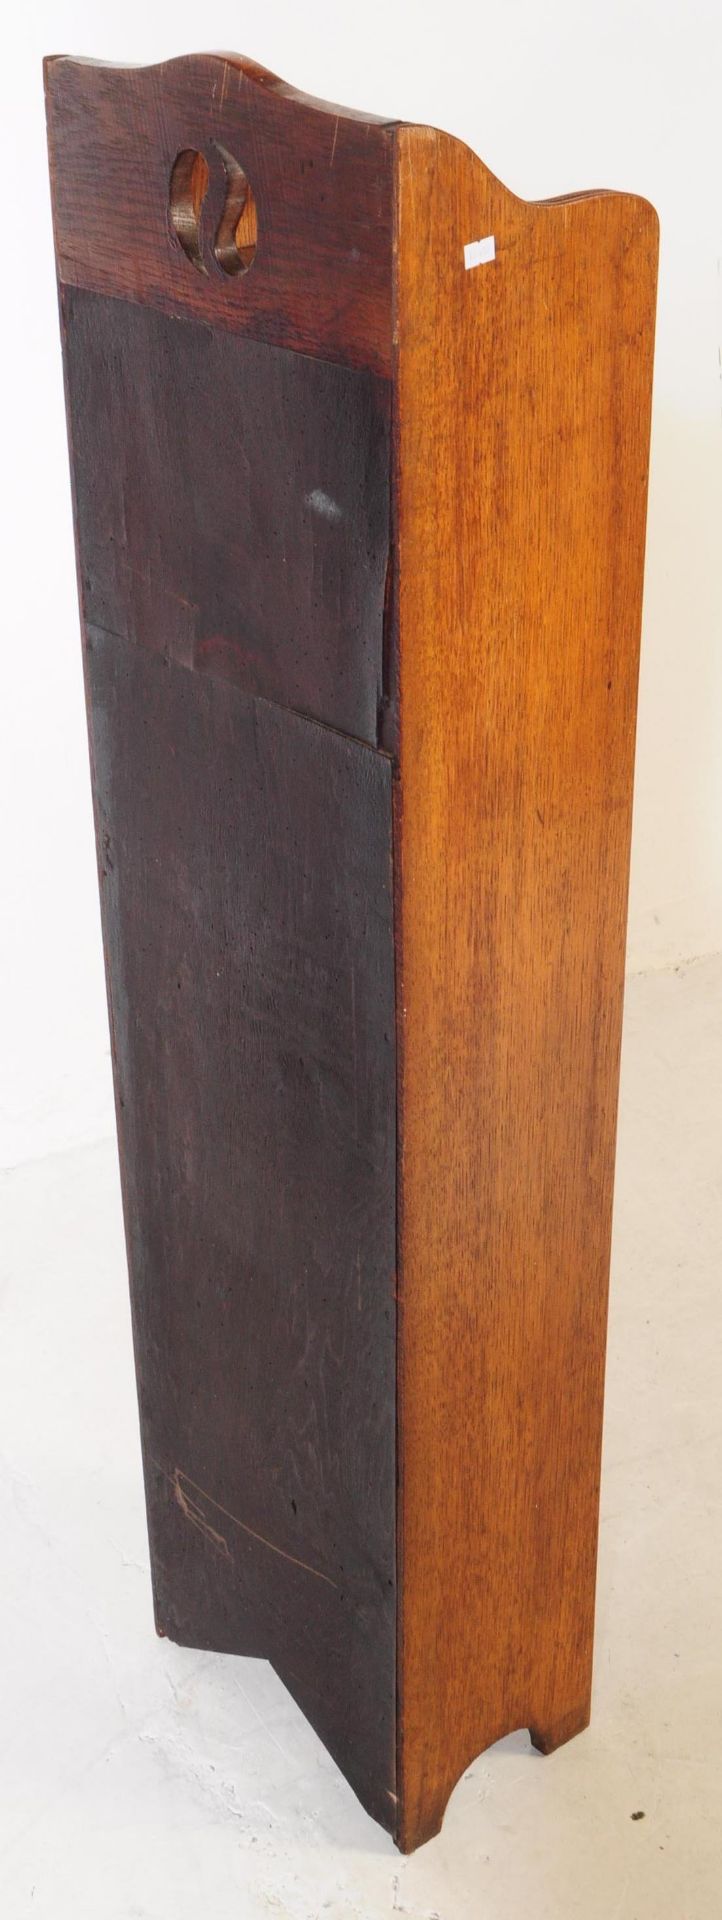 LIBERTY MANNER - MID CENTURY OAK WOOD LIBRARY BOOKCASE - Image 3 of 4